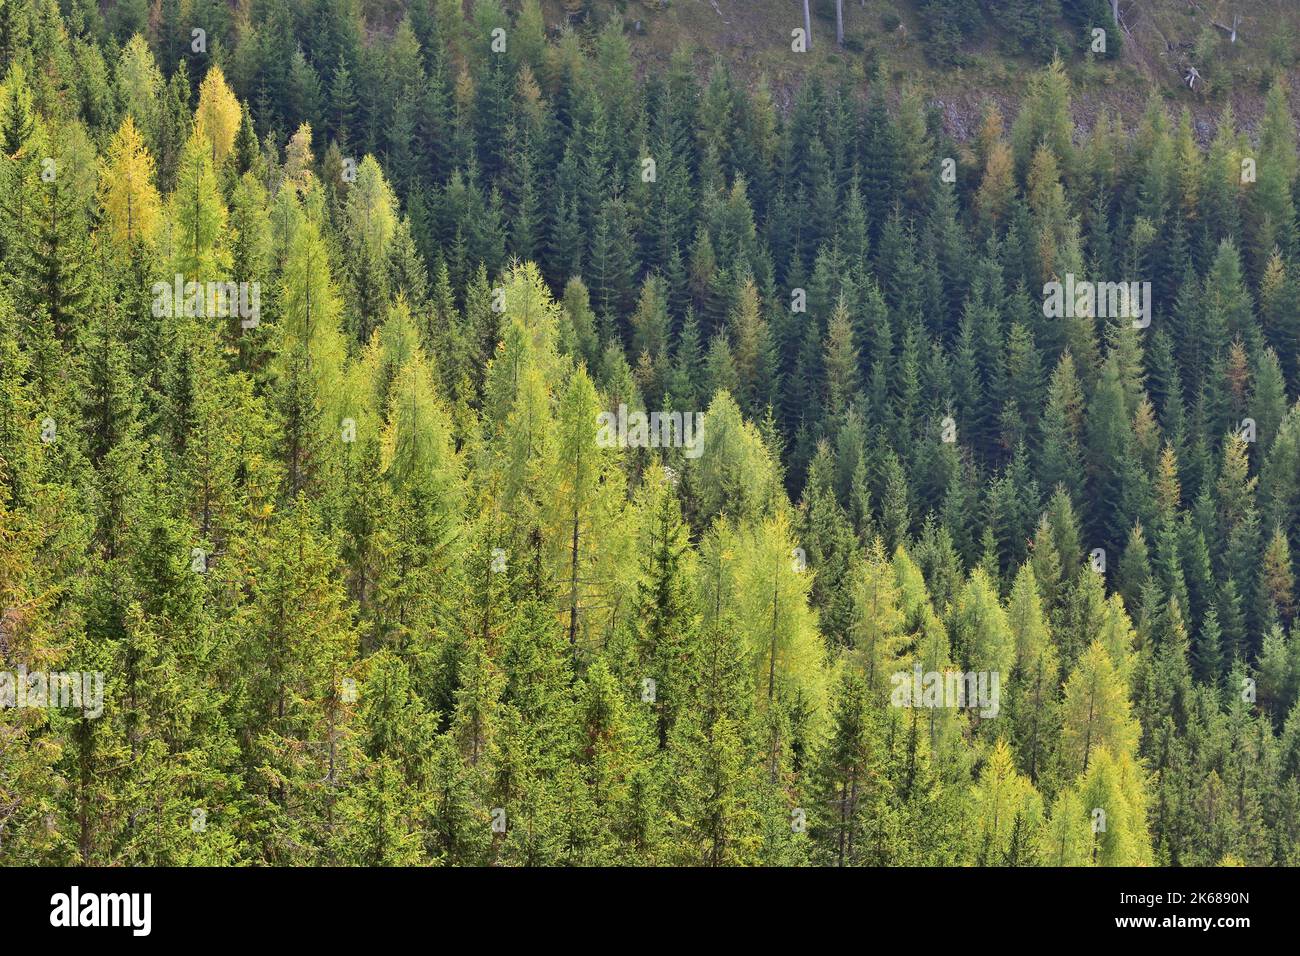 Shades of green - pine forest in Austria Stock Photo